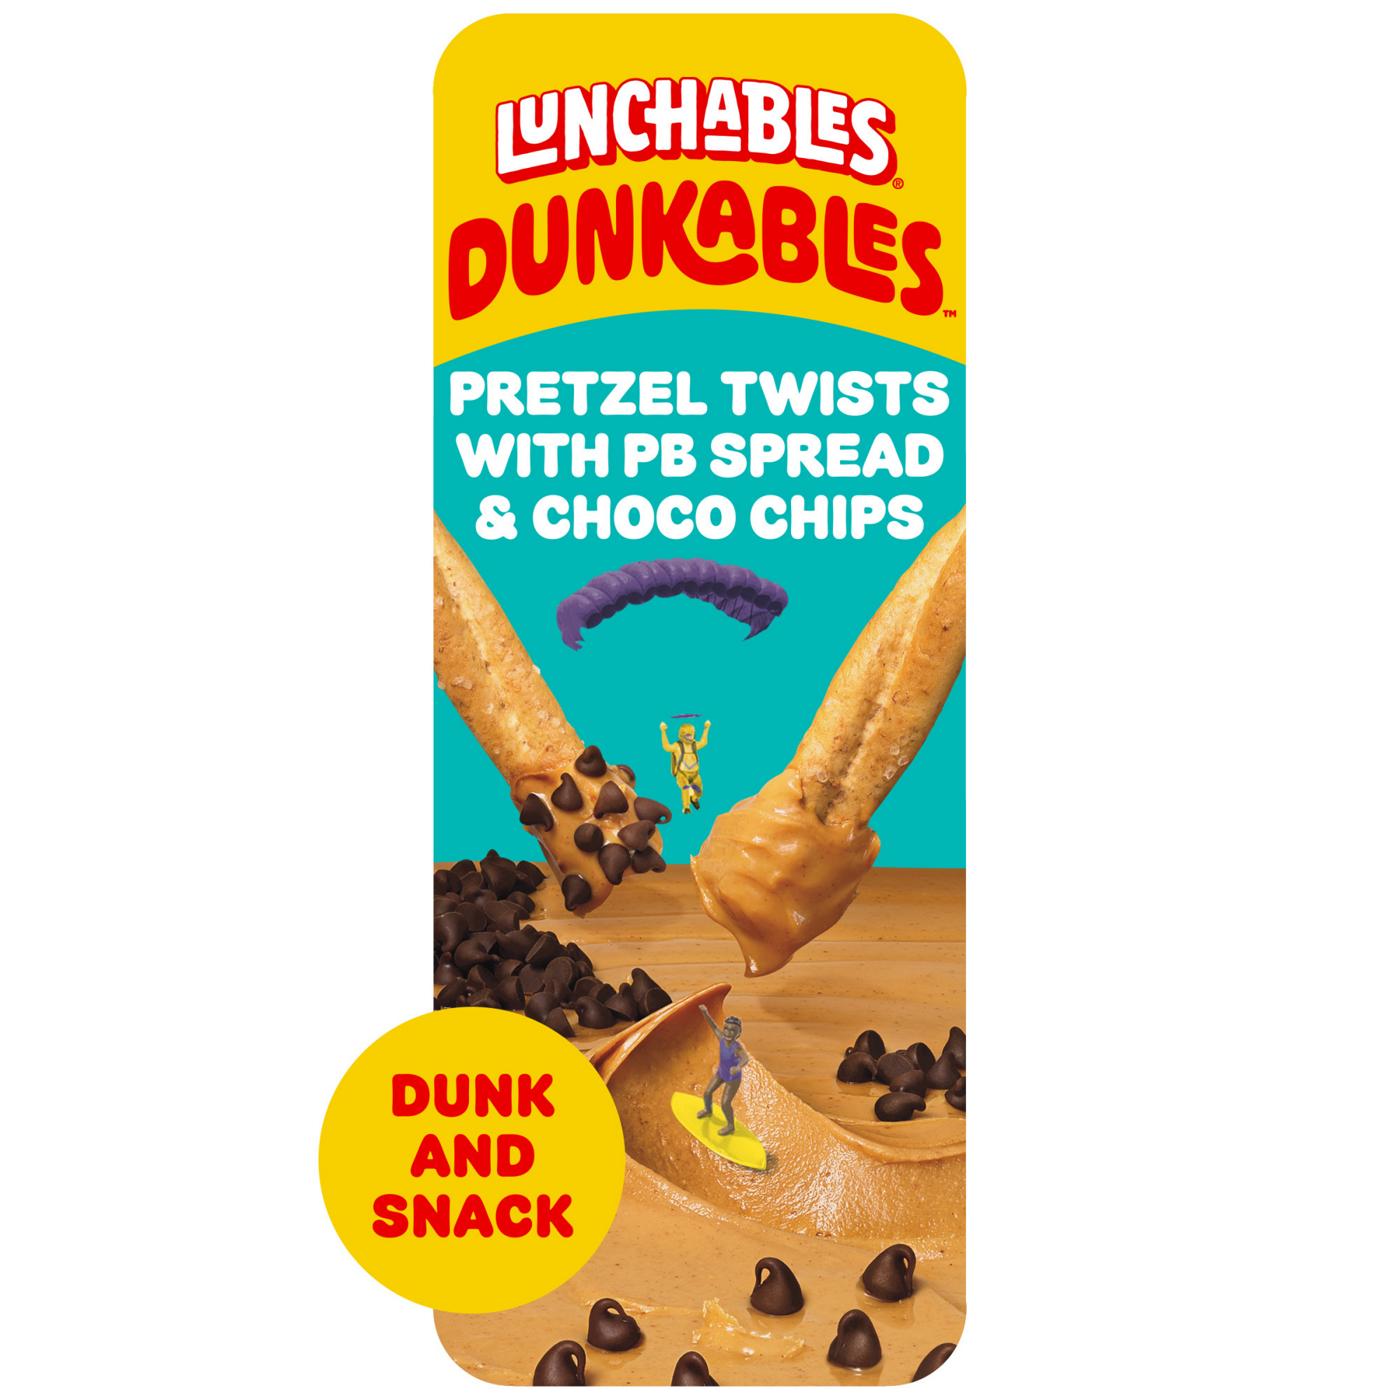 Lunchables Dunkables Snack Kit Tray - Pretzel Twists with PB Spread & Choco Chips; image 5 of 8